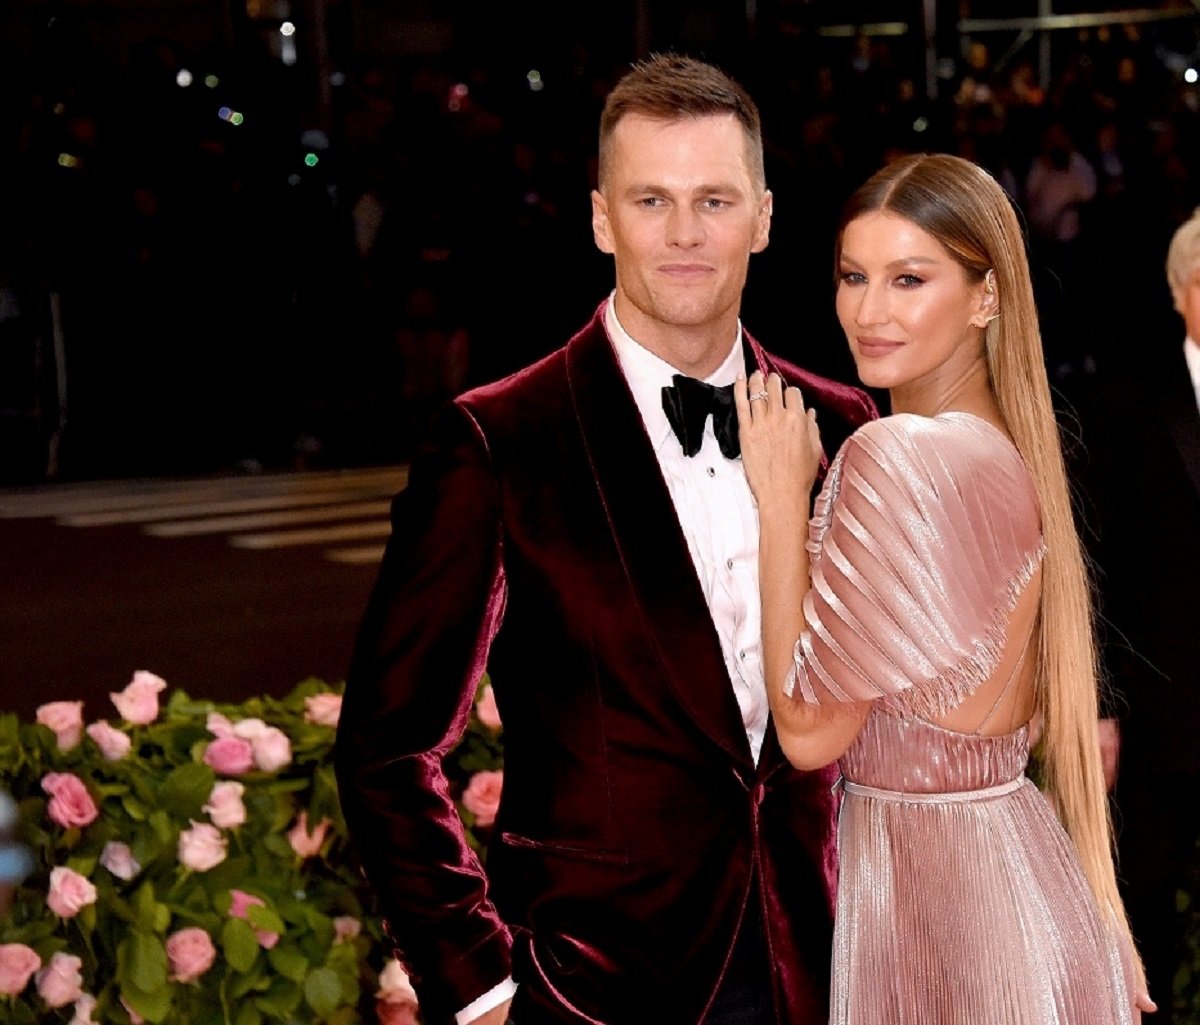 Tom Brady and Gisele Bündchen pose for a photo at the 2019 Met Gala